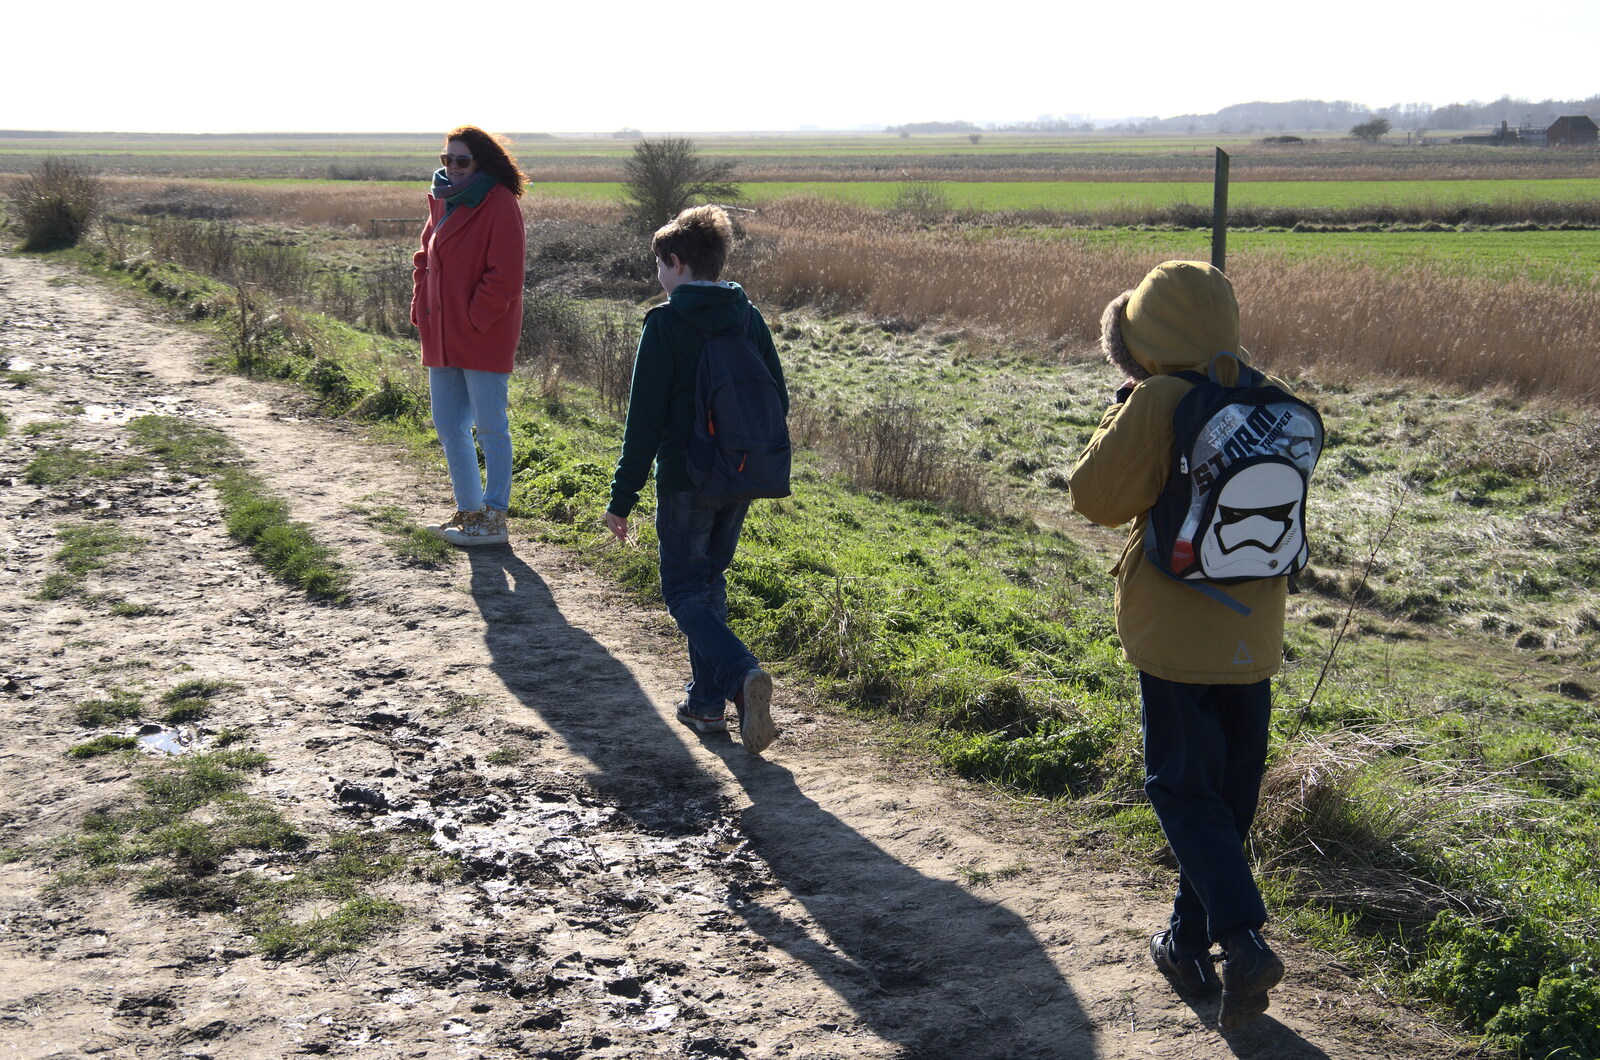 We head off around the coast path again from A Trip to Orford Castle, Orford, Suffolk - 26th February 2022